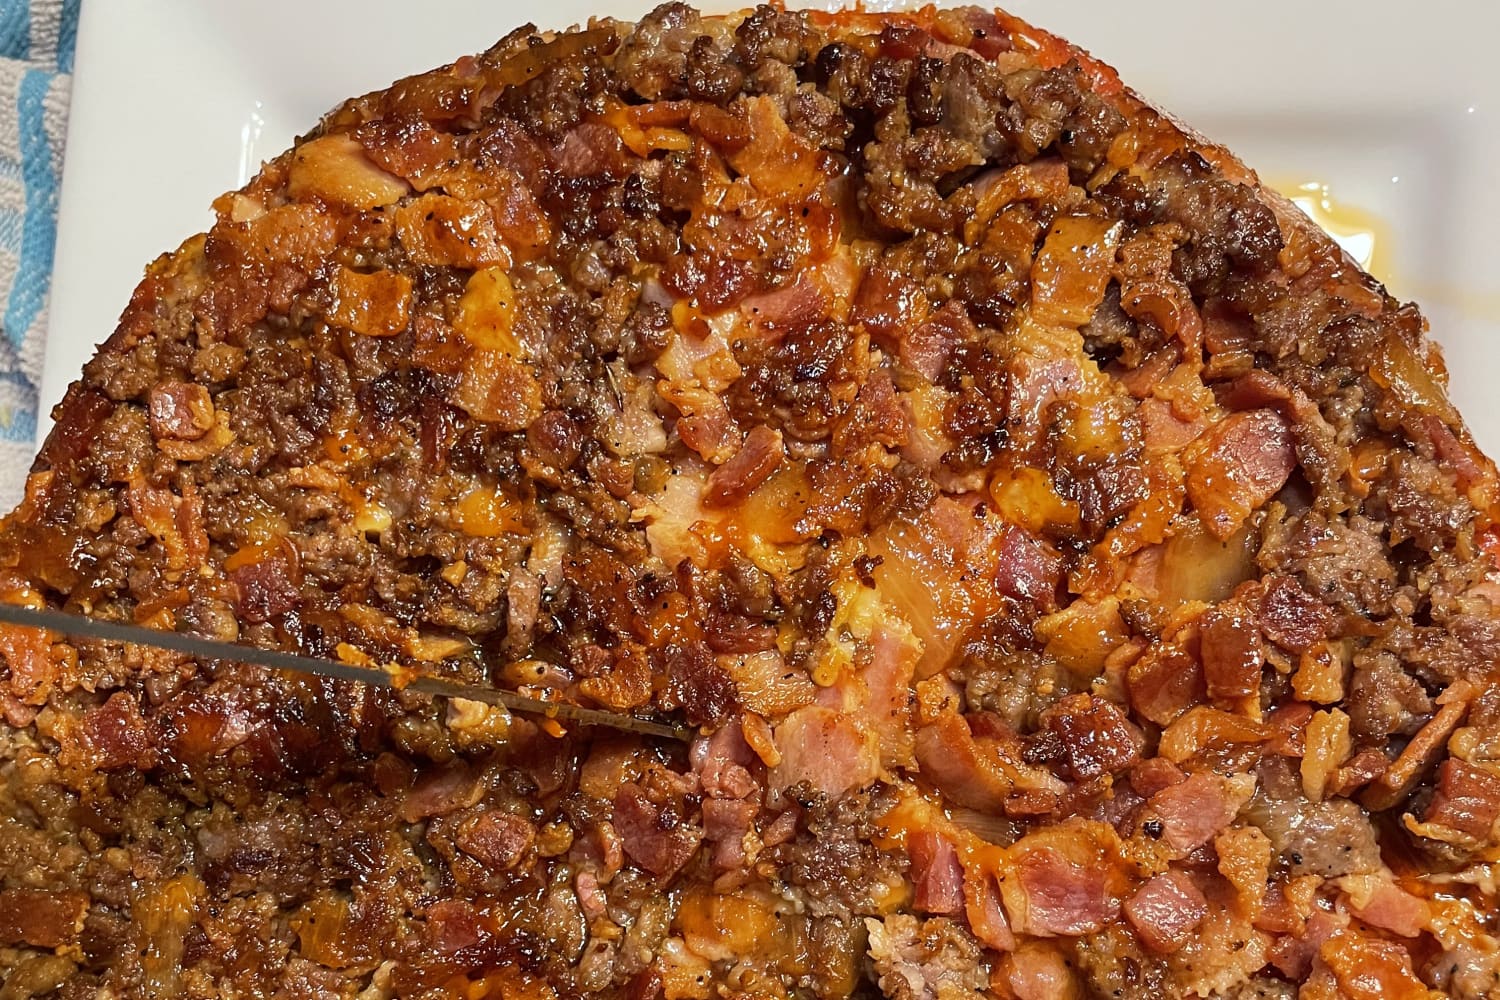 I Tried the Upside-Down Pizza Recipe That Solely Makes use of Aldi Components